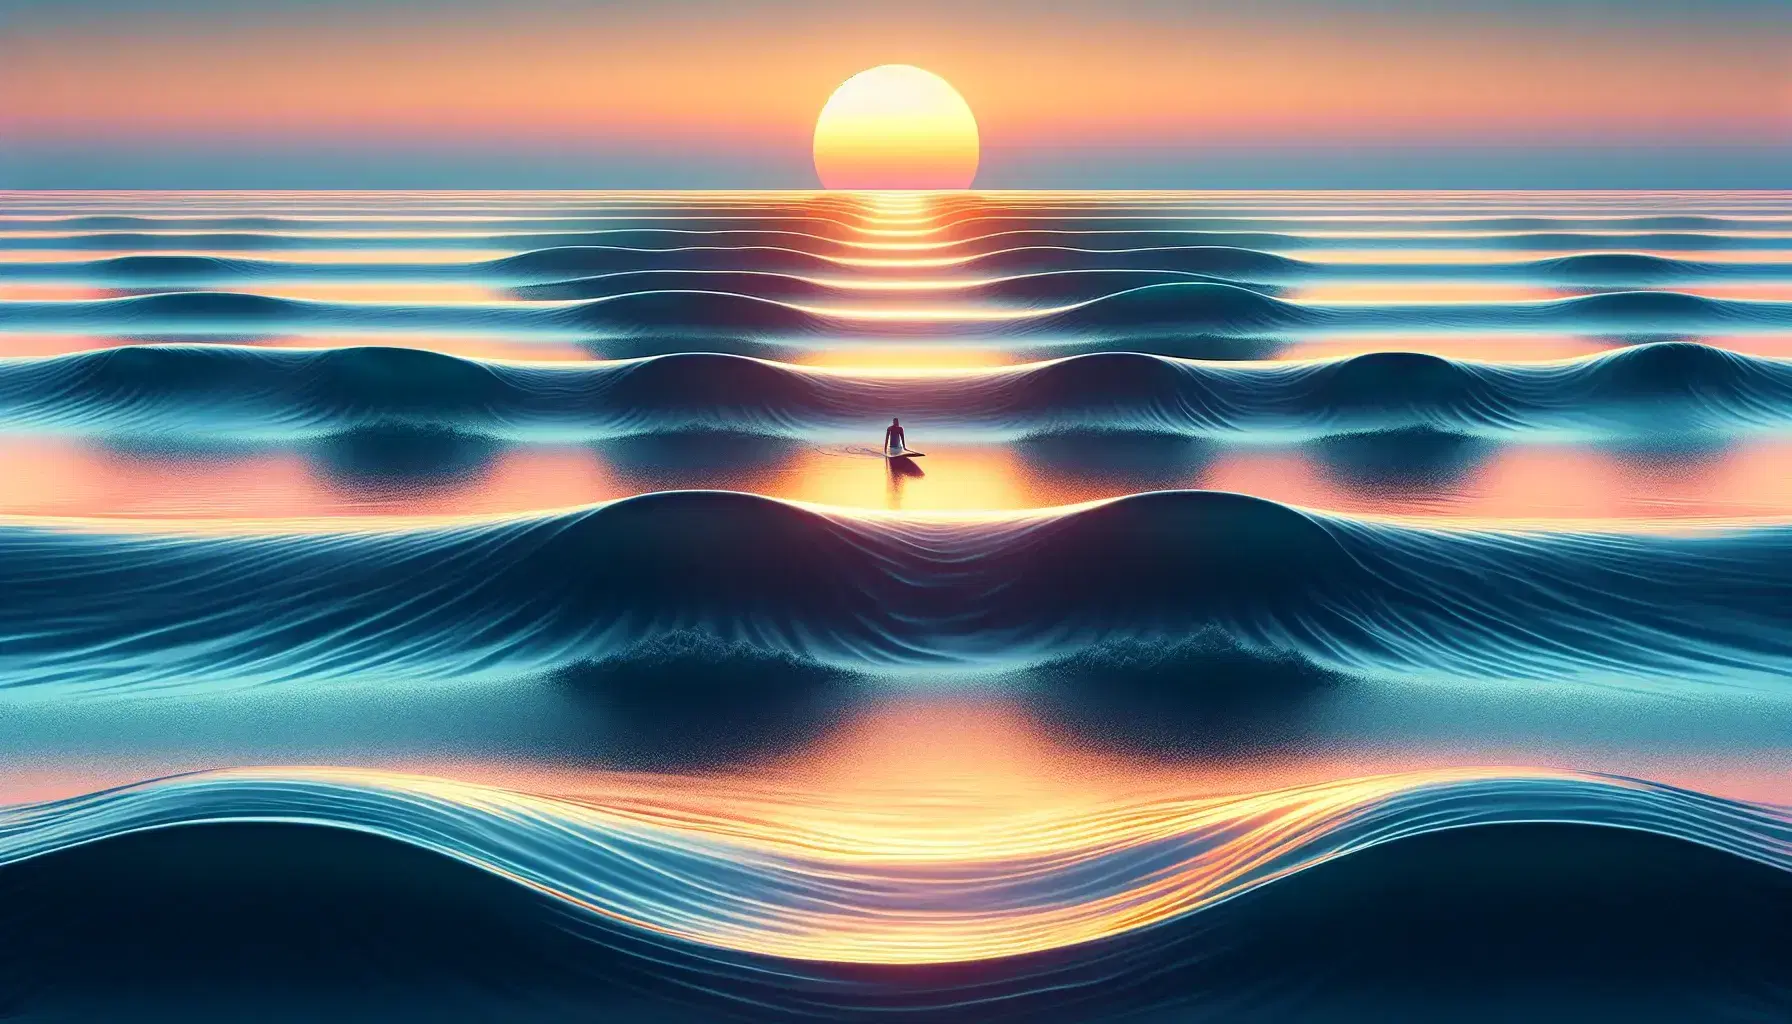 Sunset over calm ocean with varying wave amplitudes, colors transitioning from dark blue to orange-pink, and a silhouetted surfer on a surfboard.